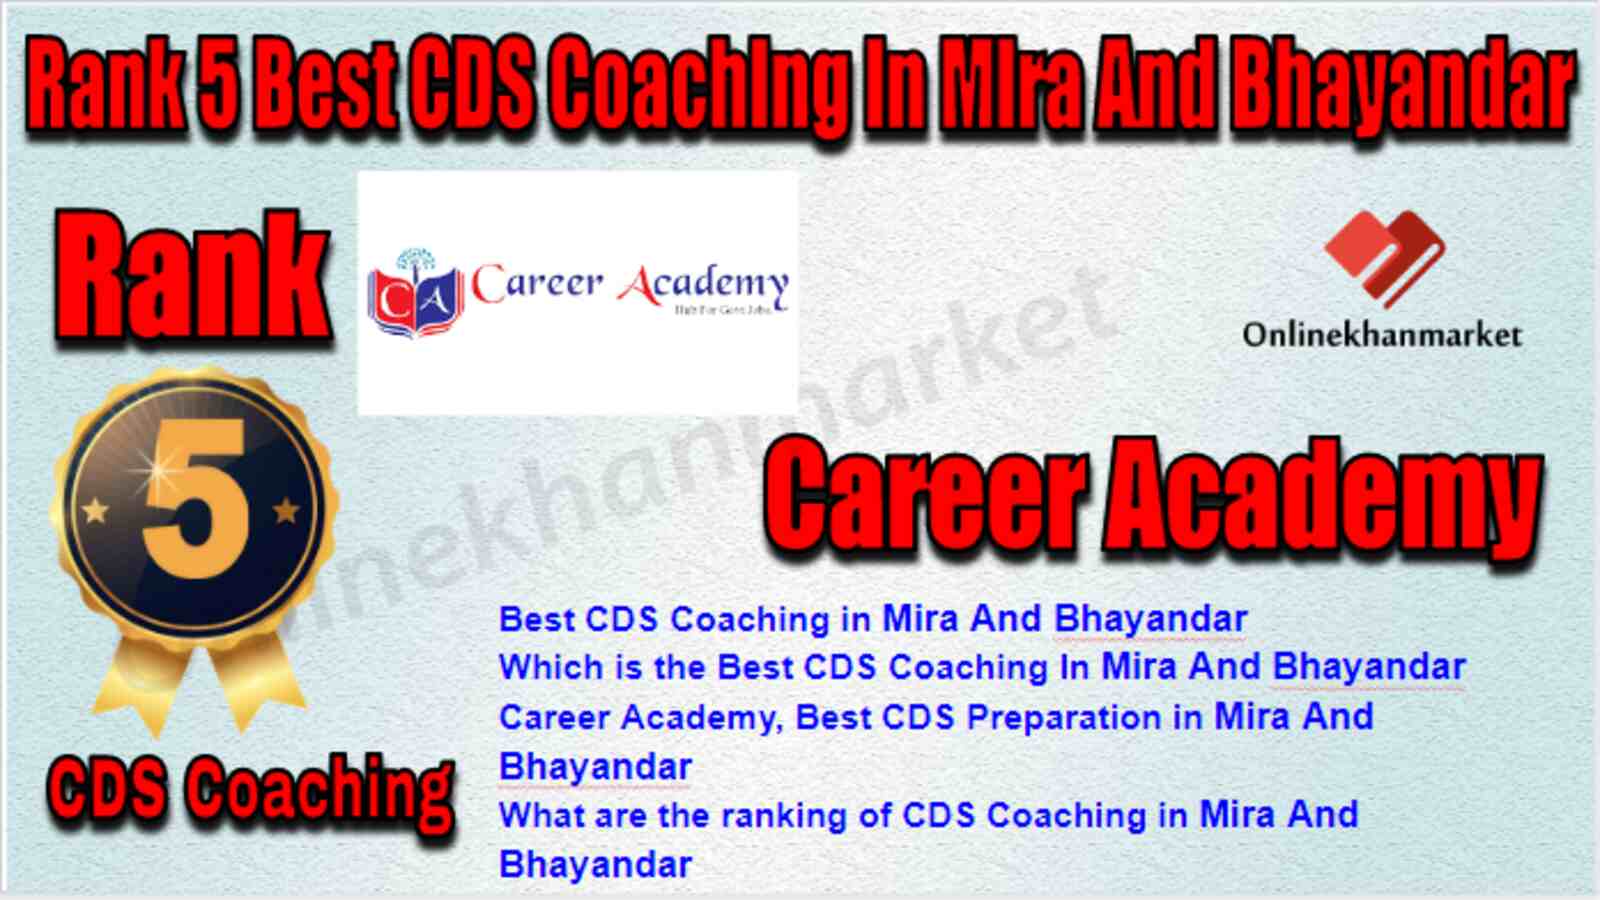 Rank 5 Best CDS Coaching in Mira and Bhayandar